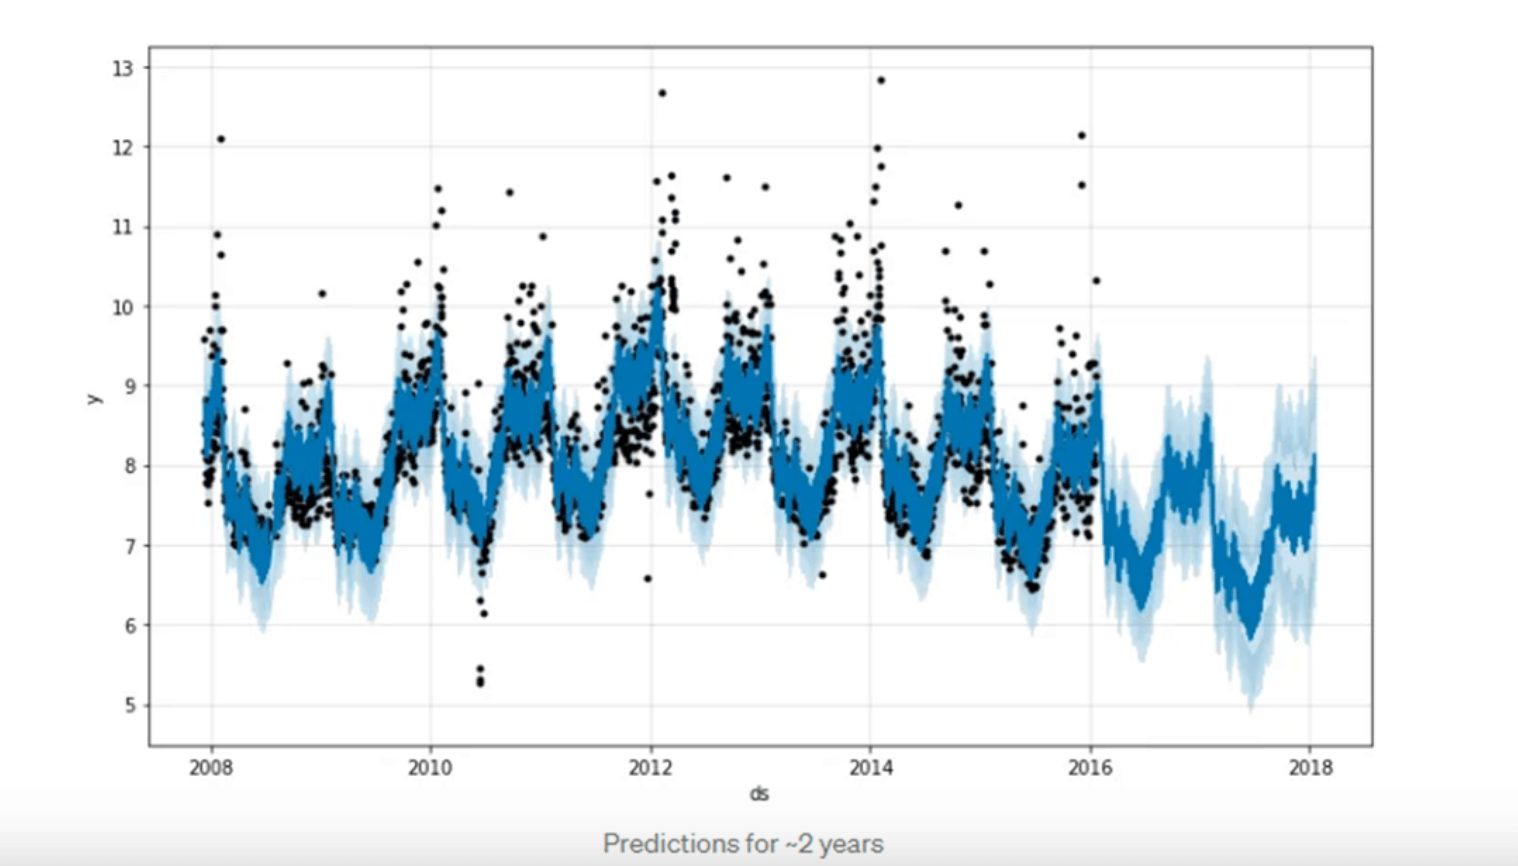 A Prophet visualization for time-series analysis with Python